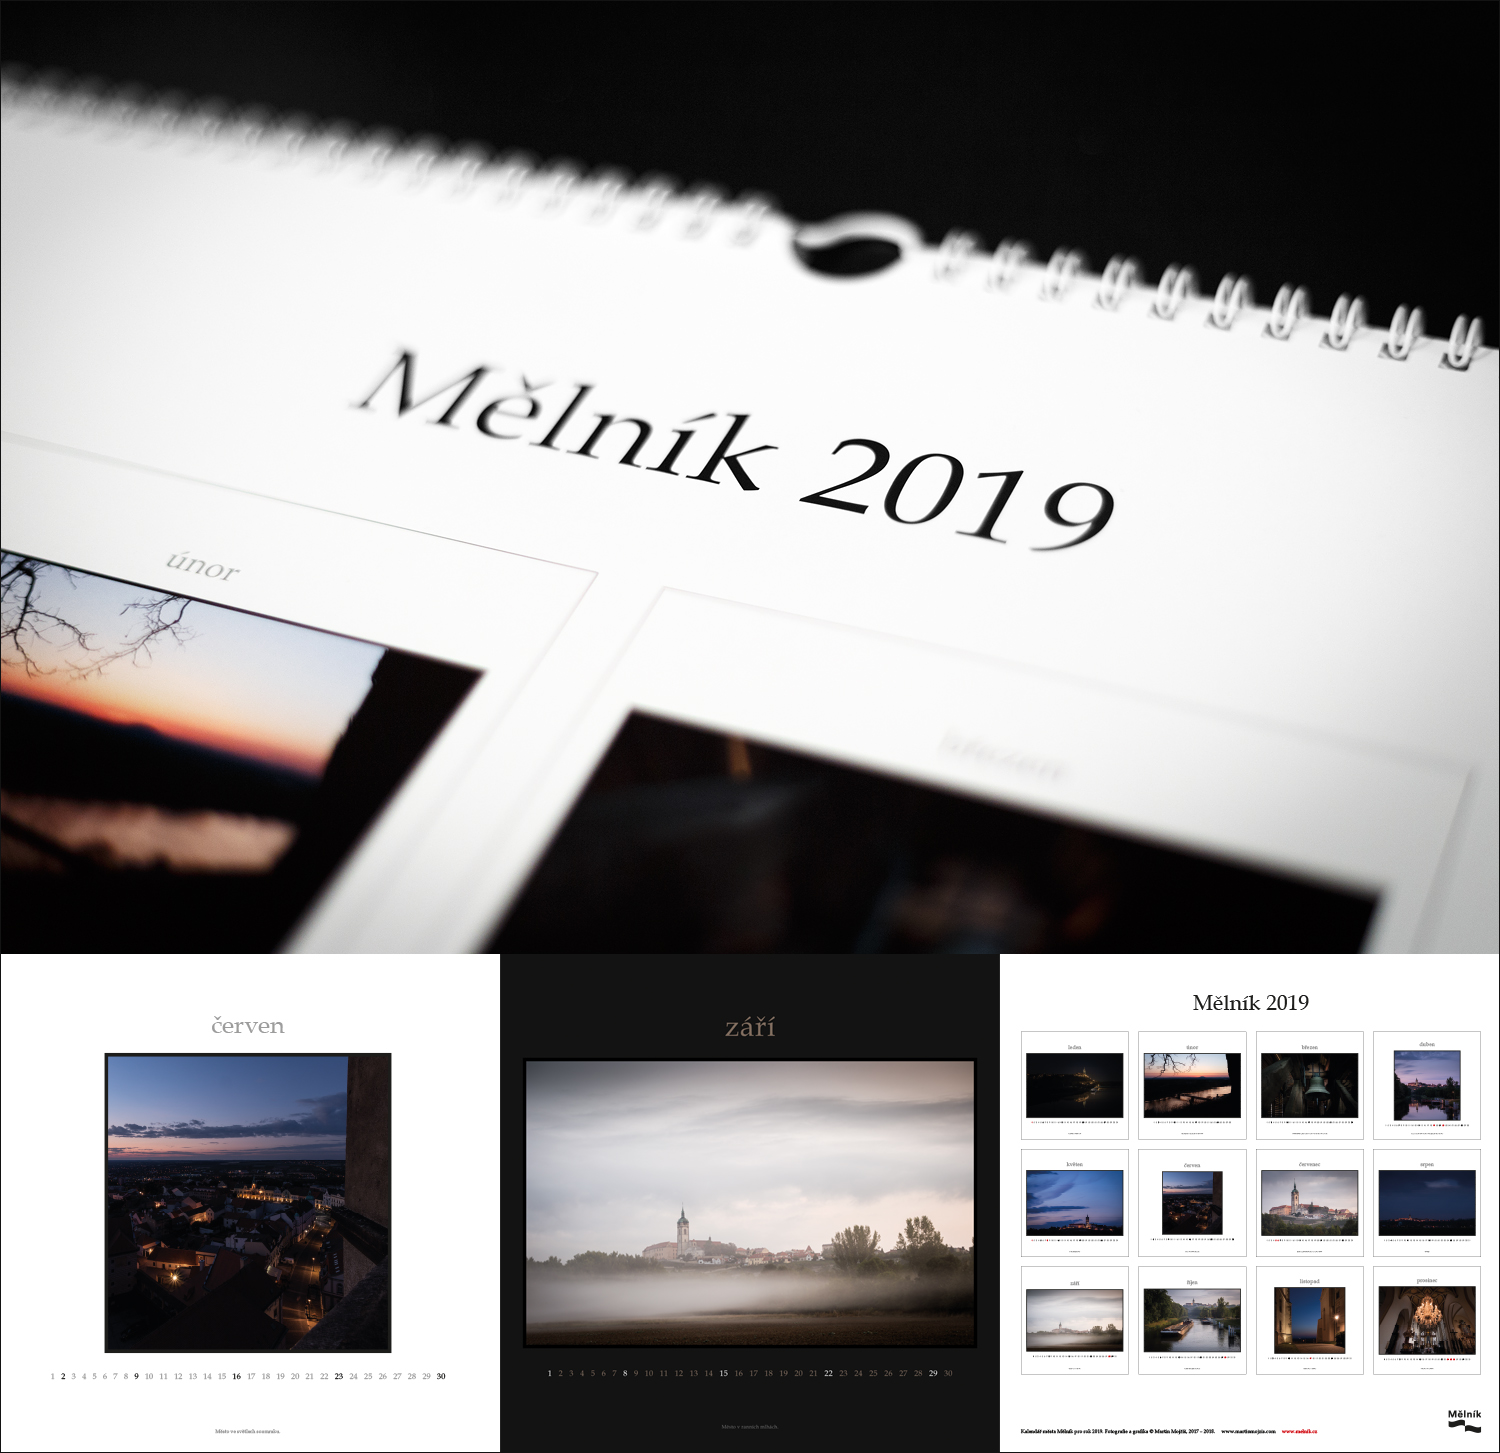 Auctorial calendar of Melnik City for 2019 year. Photography and graphic art © Martin Mojzis.